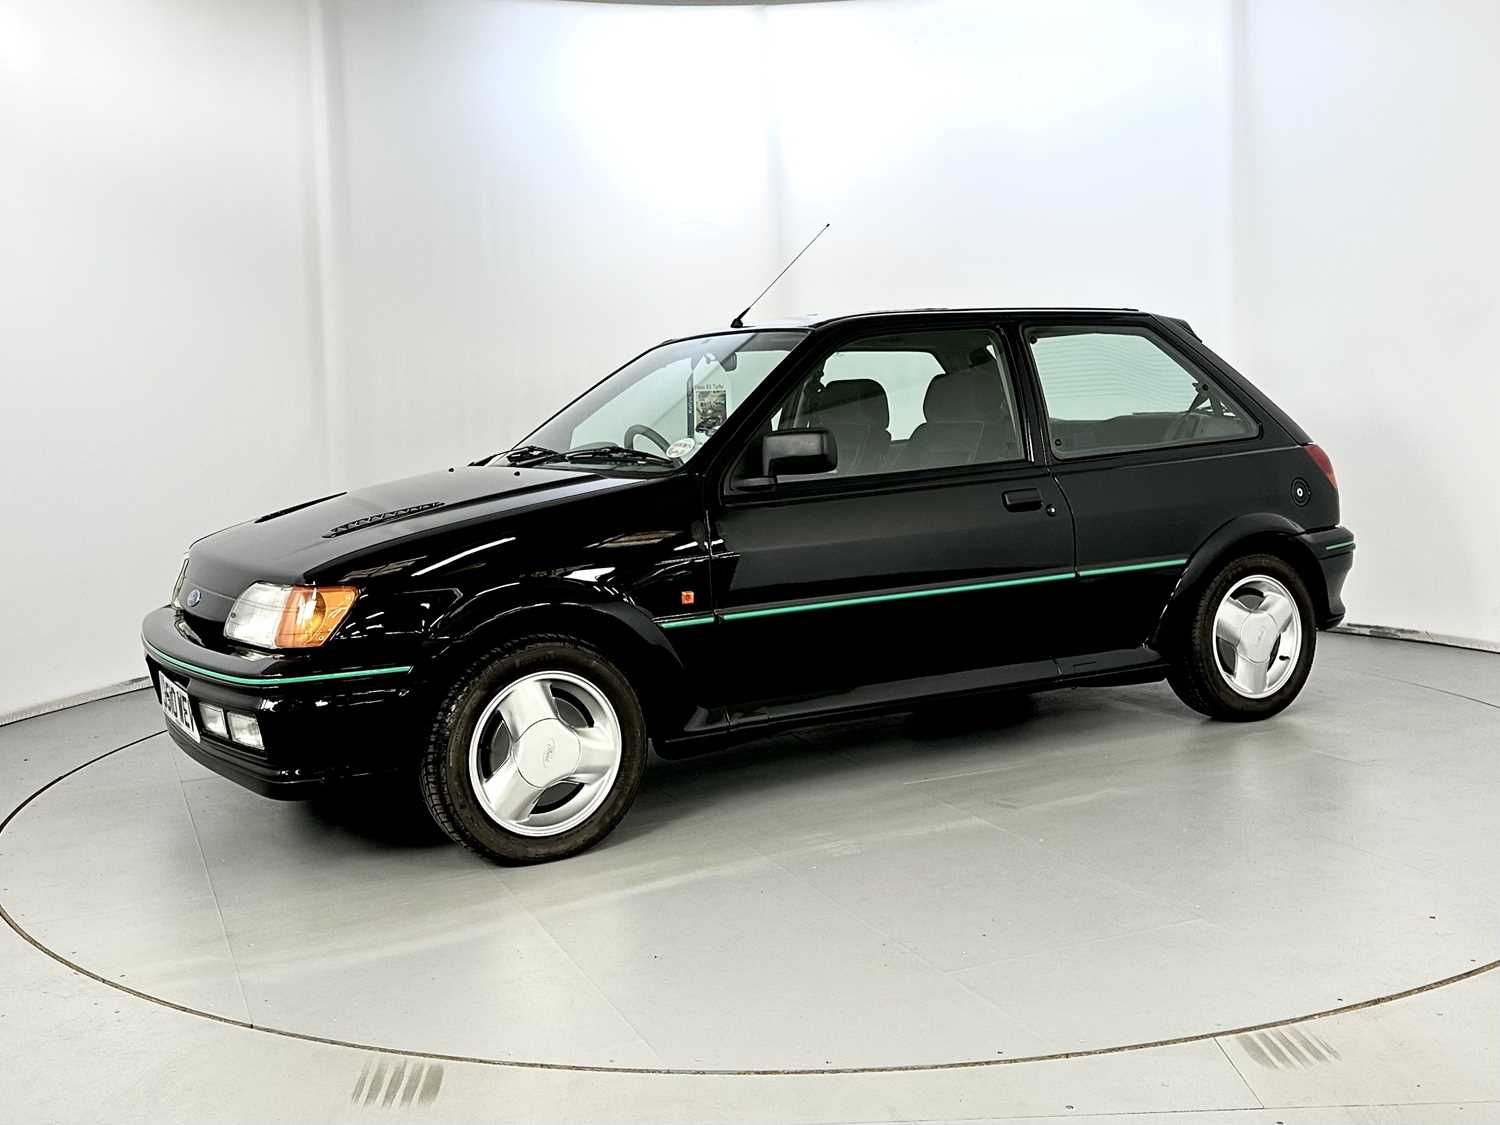 1991 Ford Fiesta RS Turbo Spectacular Original Condition  - Image 4 of 40